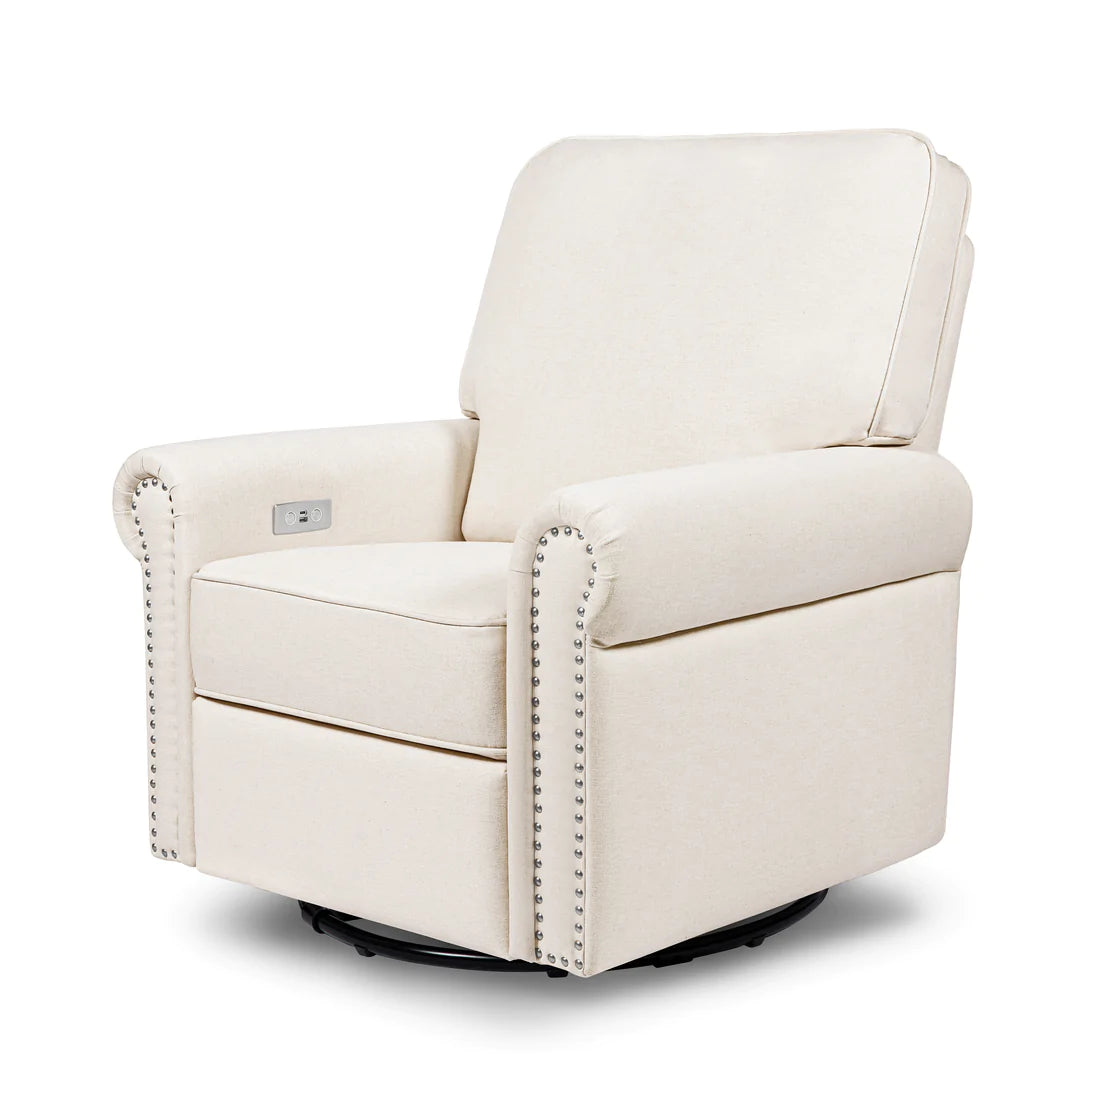 Namesake Linden Electronic Recliner and Swivel Glider with USB Port - Performance Cream Eco-Weave